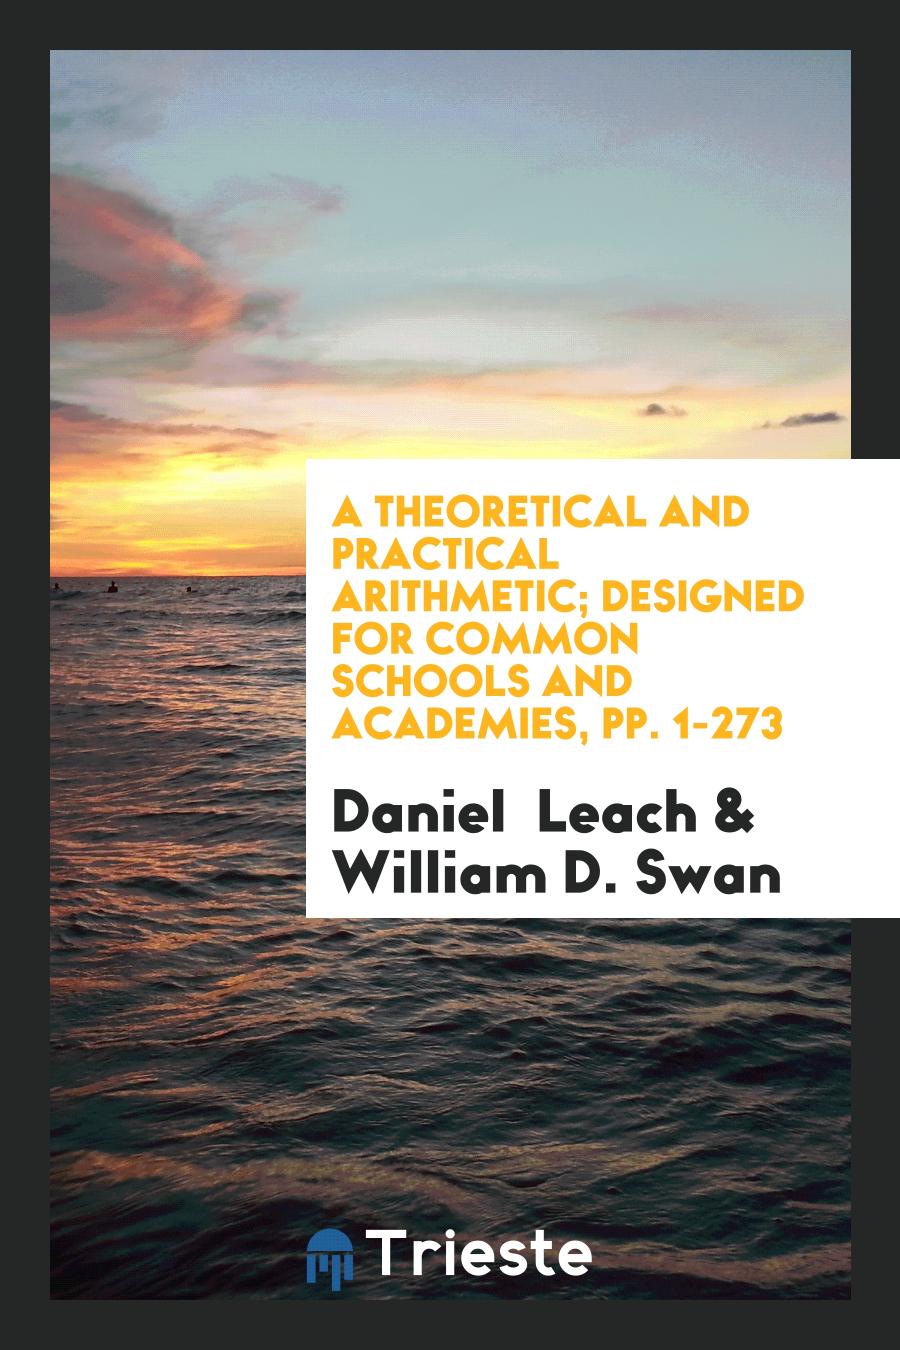 A Theoretical and Practical Arithmetic; Designed for Common Schools and Academies, pp. 1-273